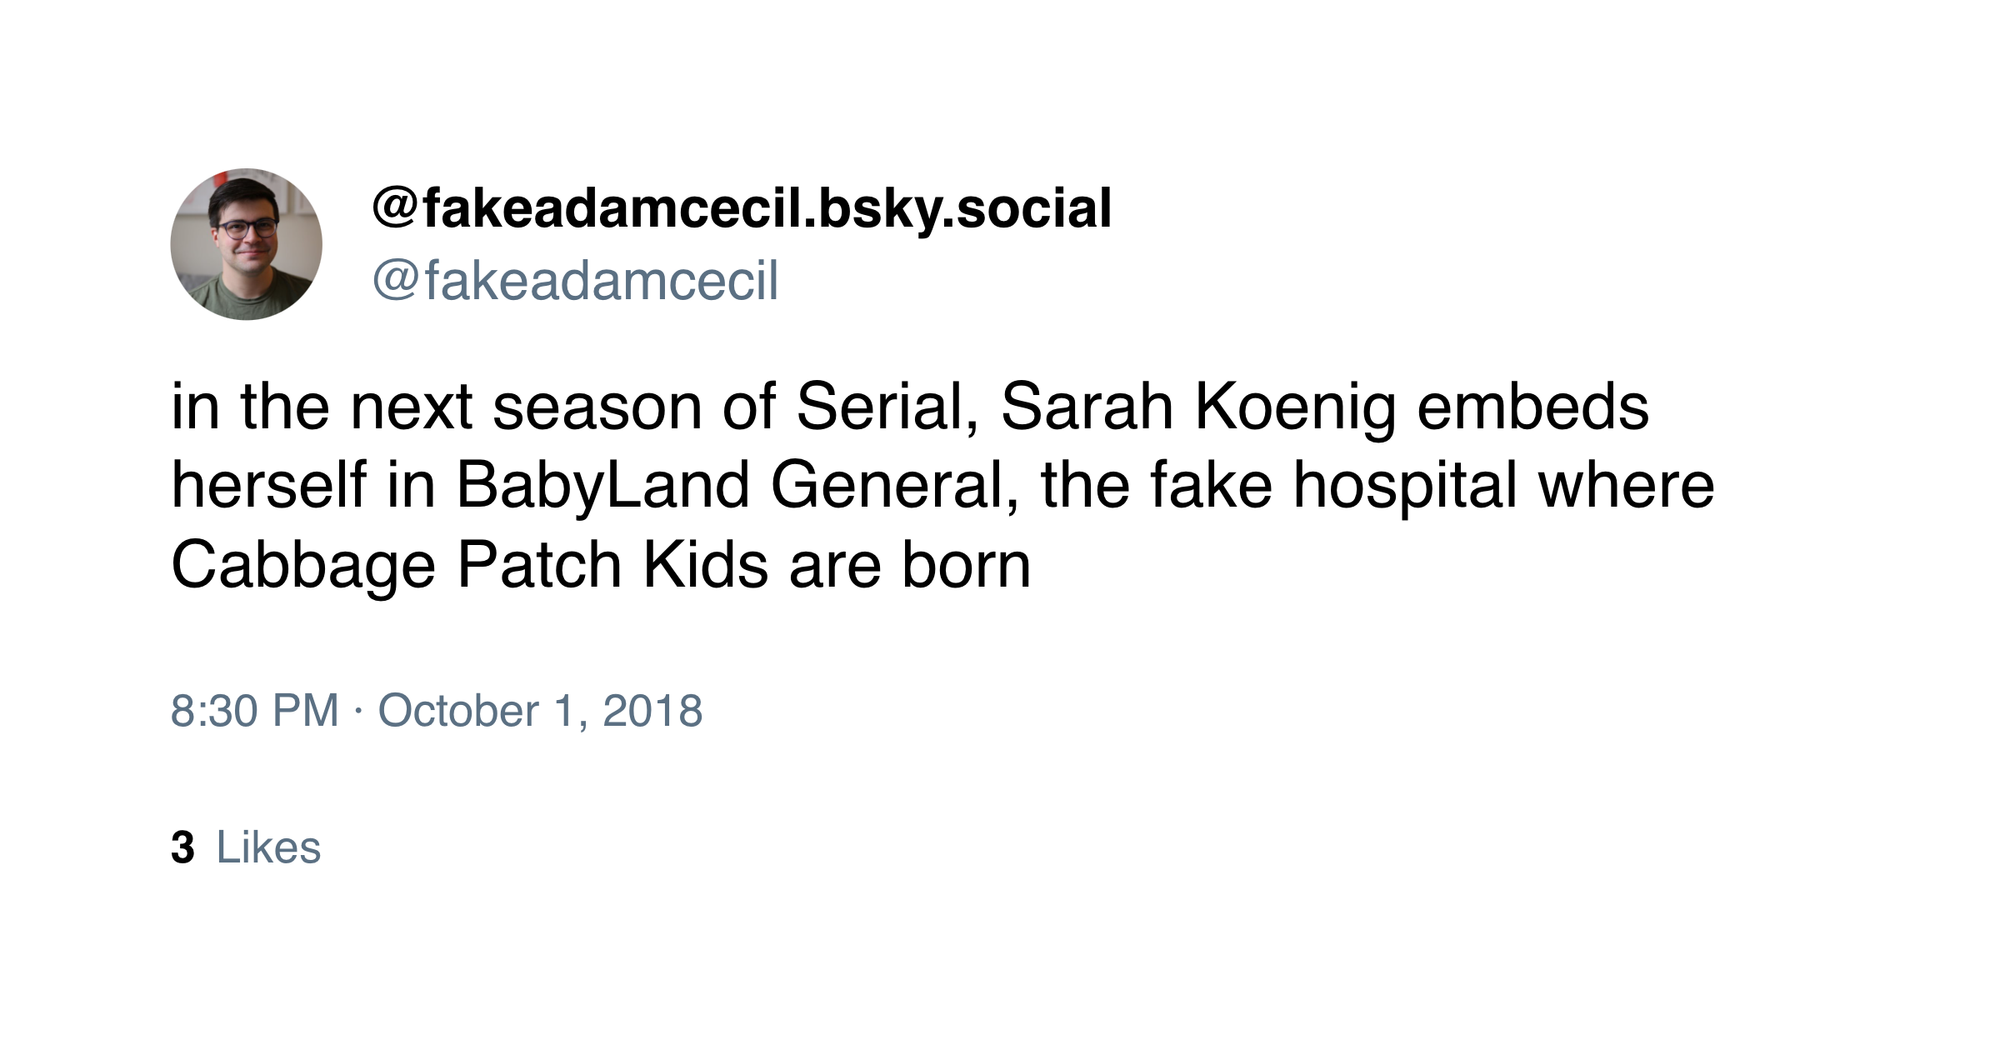 @fakeadamcecil on Twitter: "in the next season of Serial, Sarah Koenig embeds herself in BabyLand General, the fake hospital where Cabbage Patch Kids are born"